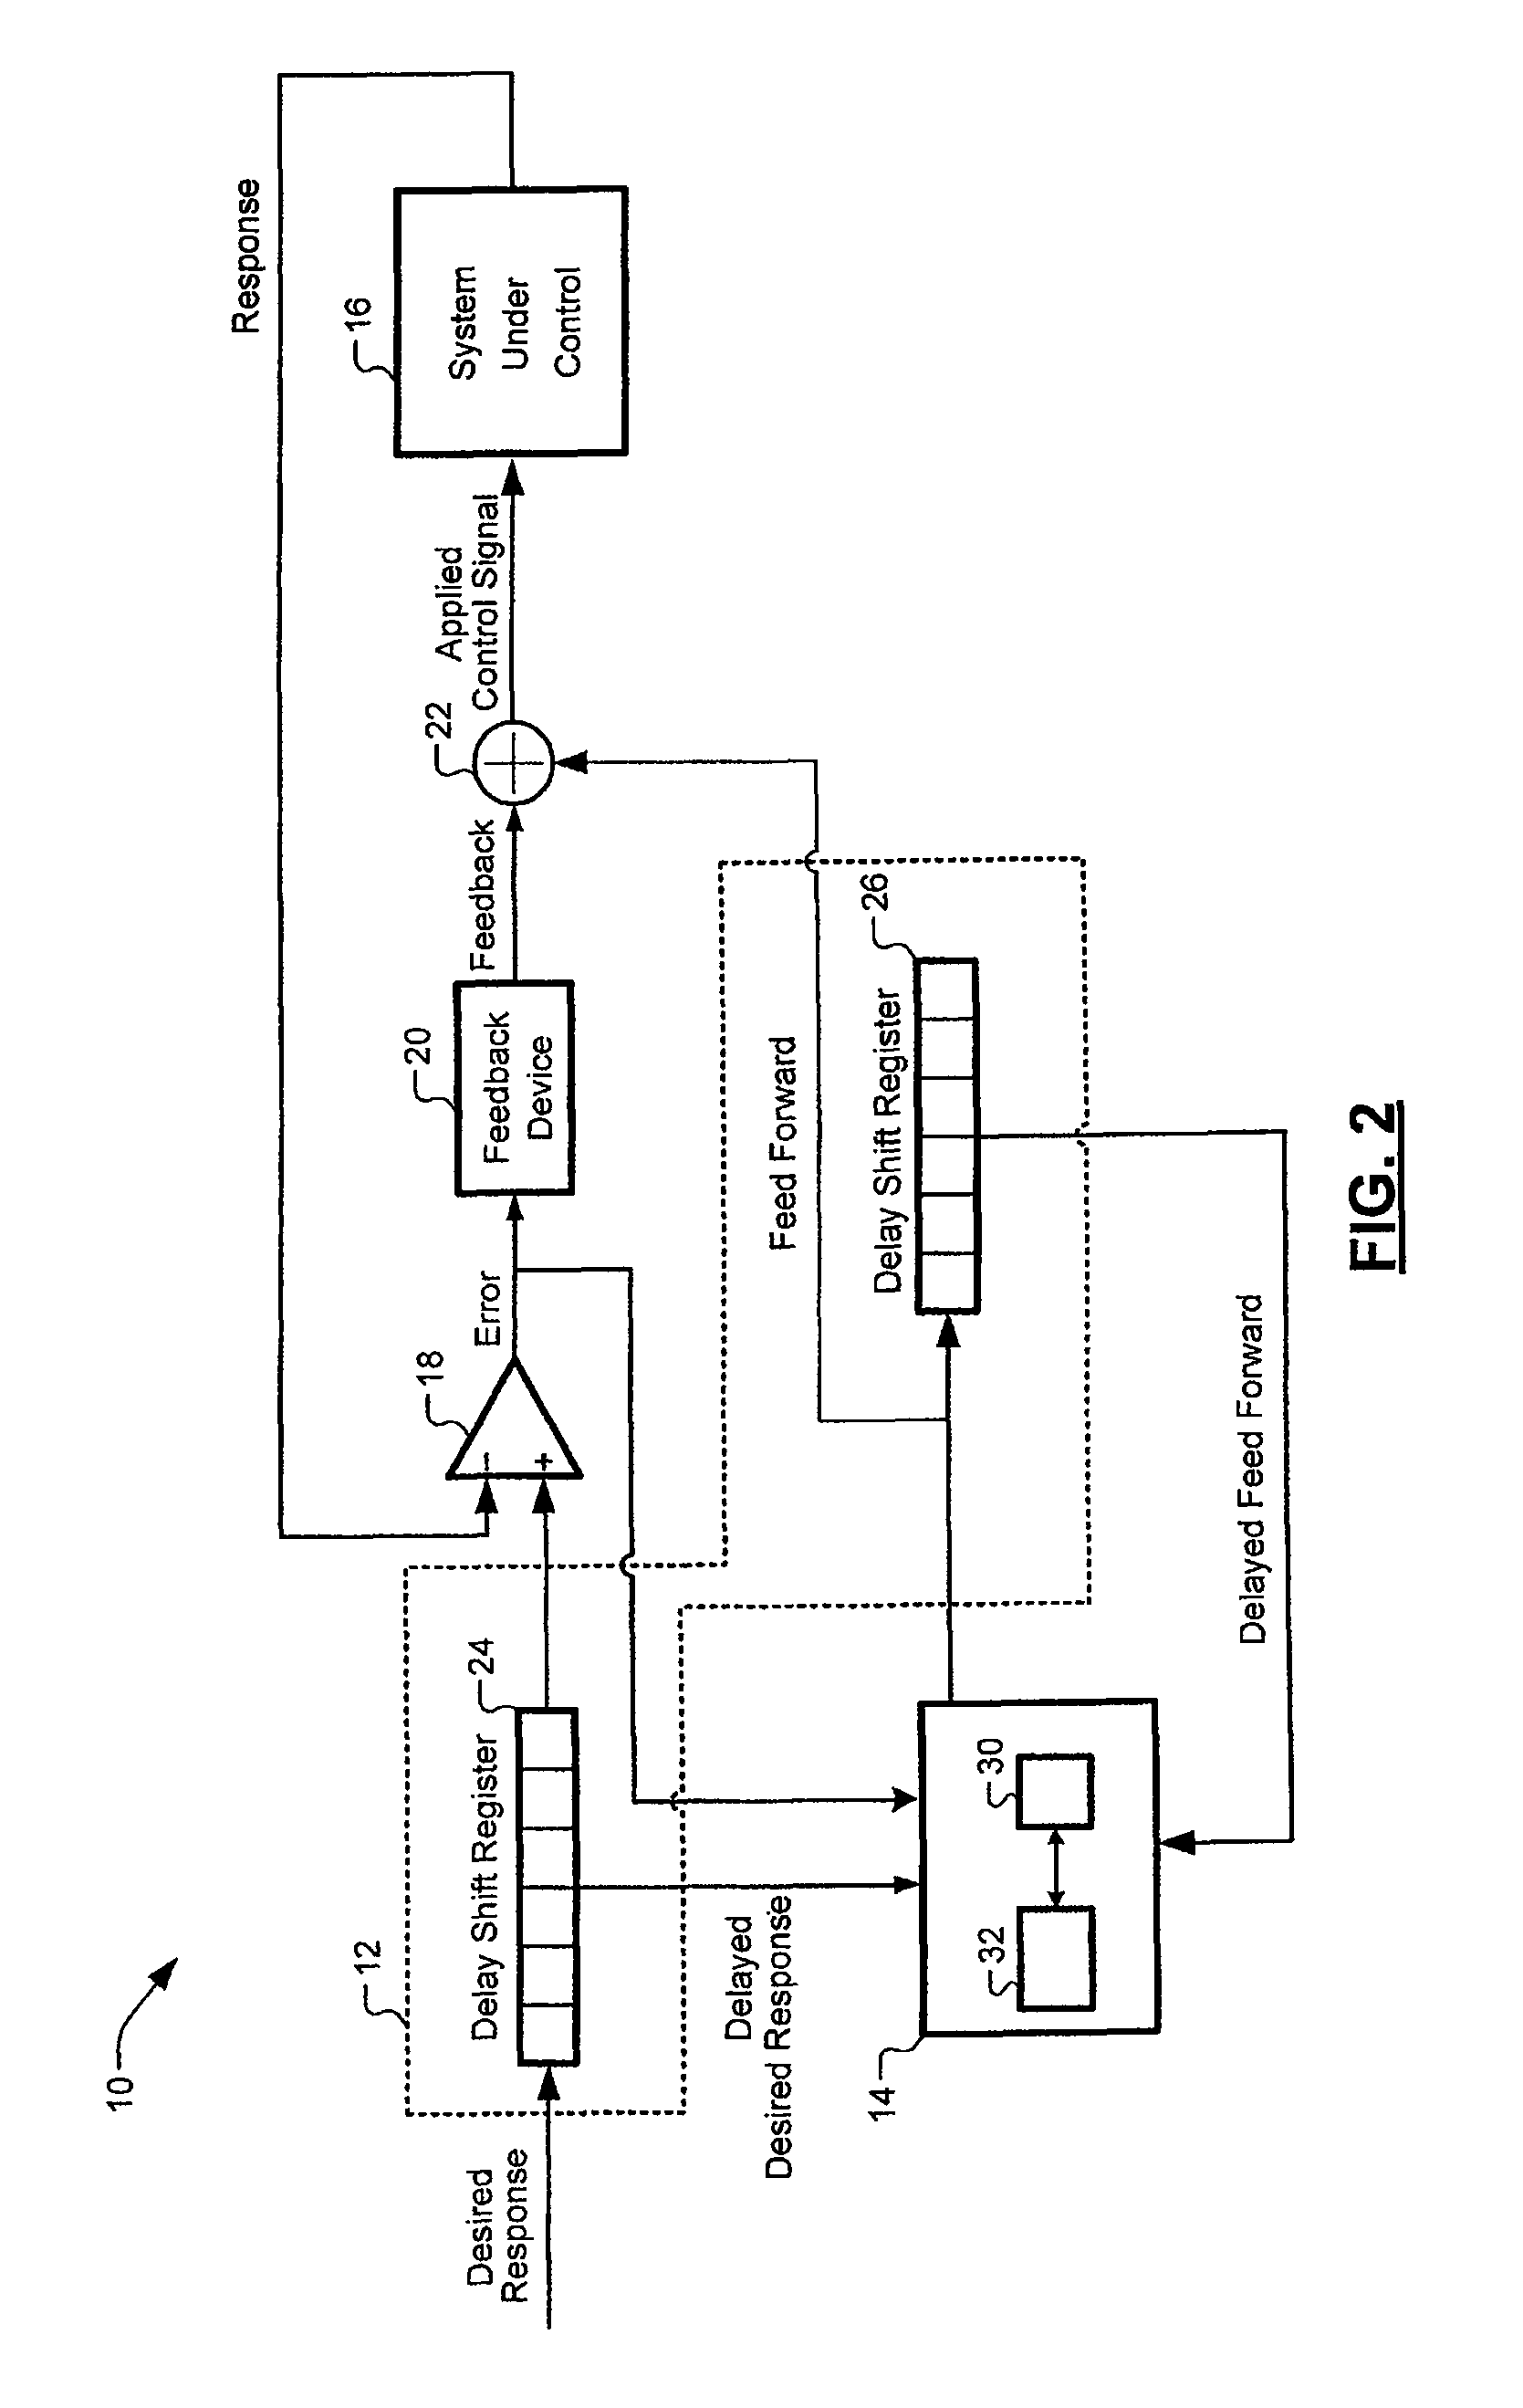 Adaptive neural net feed forward system and method for adaptive control of mechanical systems